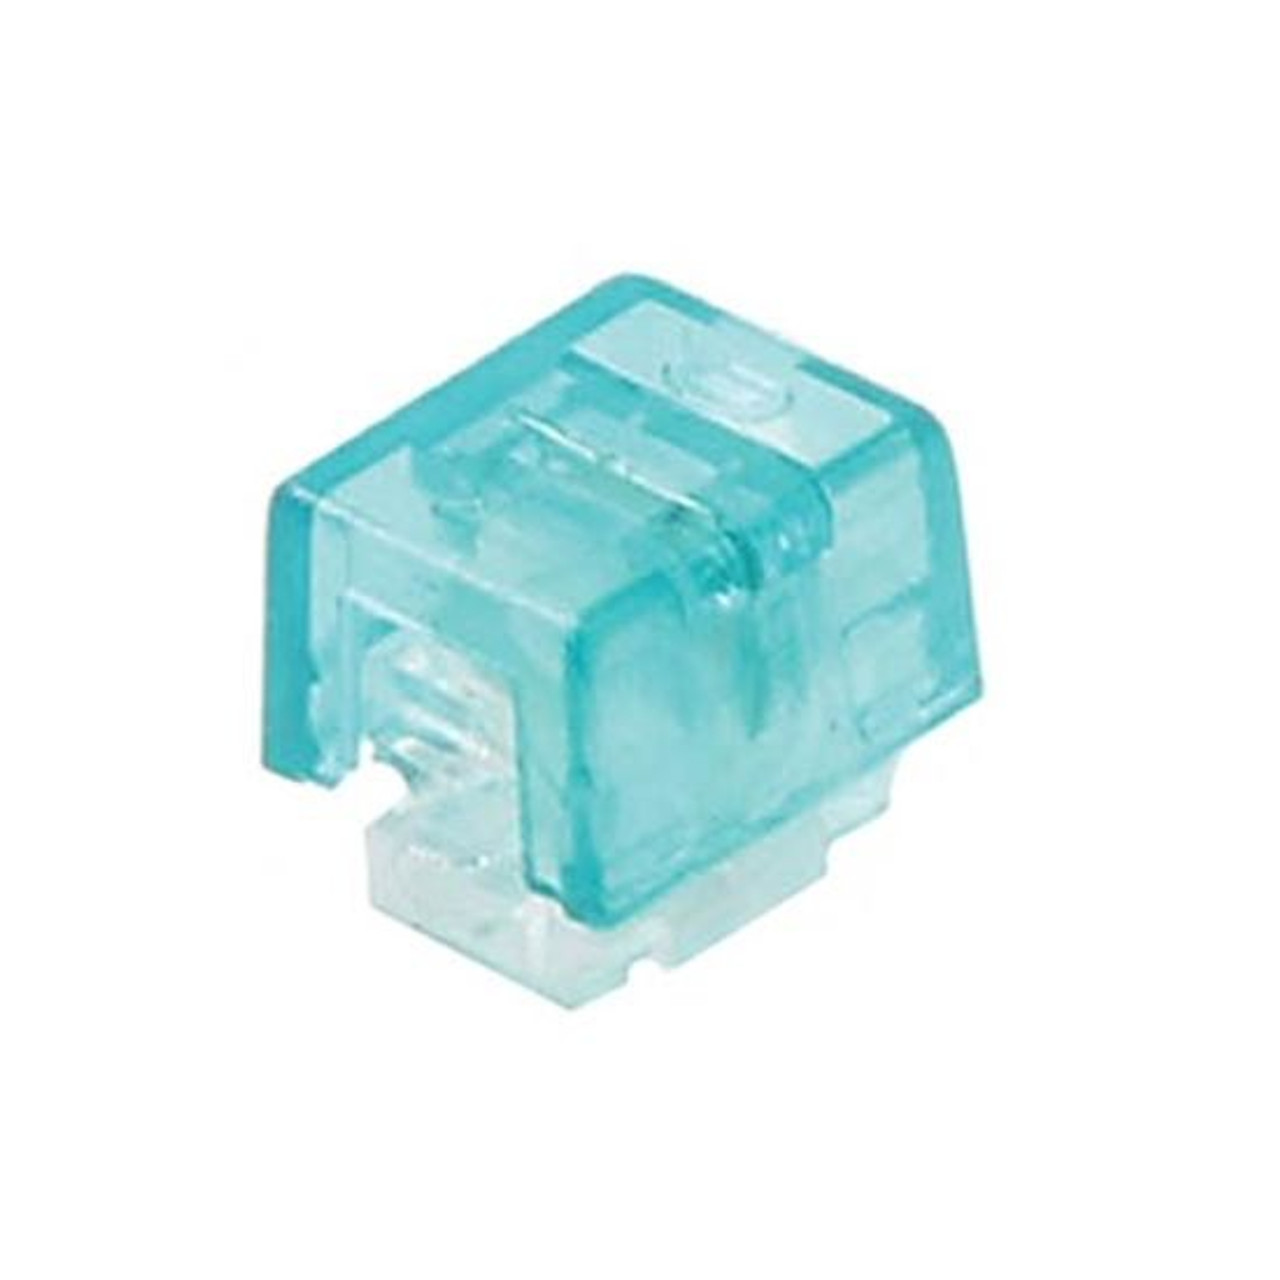 Eagle UB Butt Tap Connector 100 Pack Gel Filled 22-26 AWG Telcom Splicing